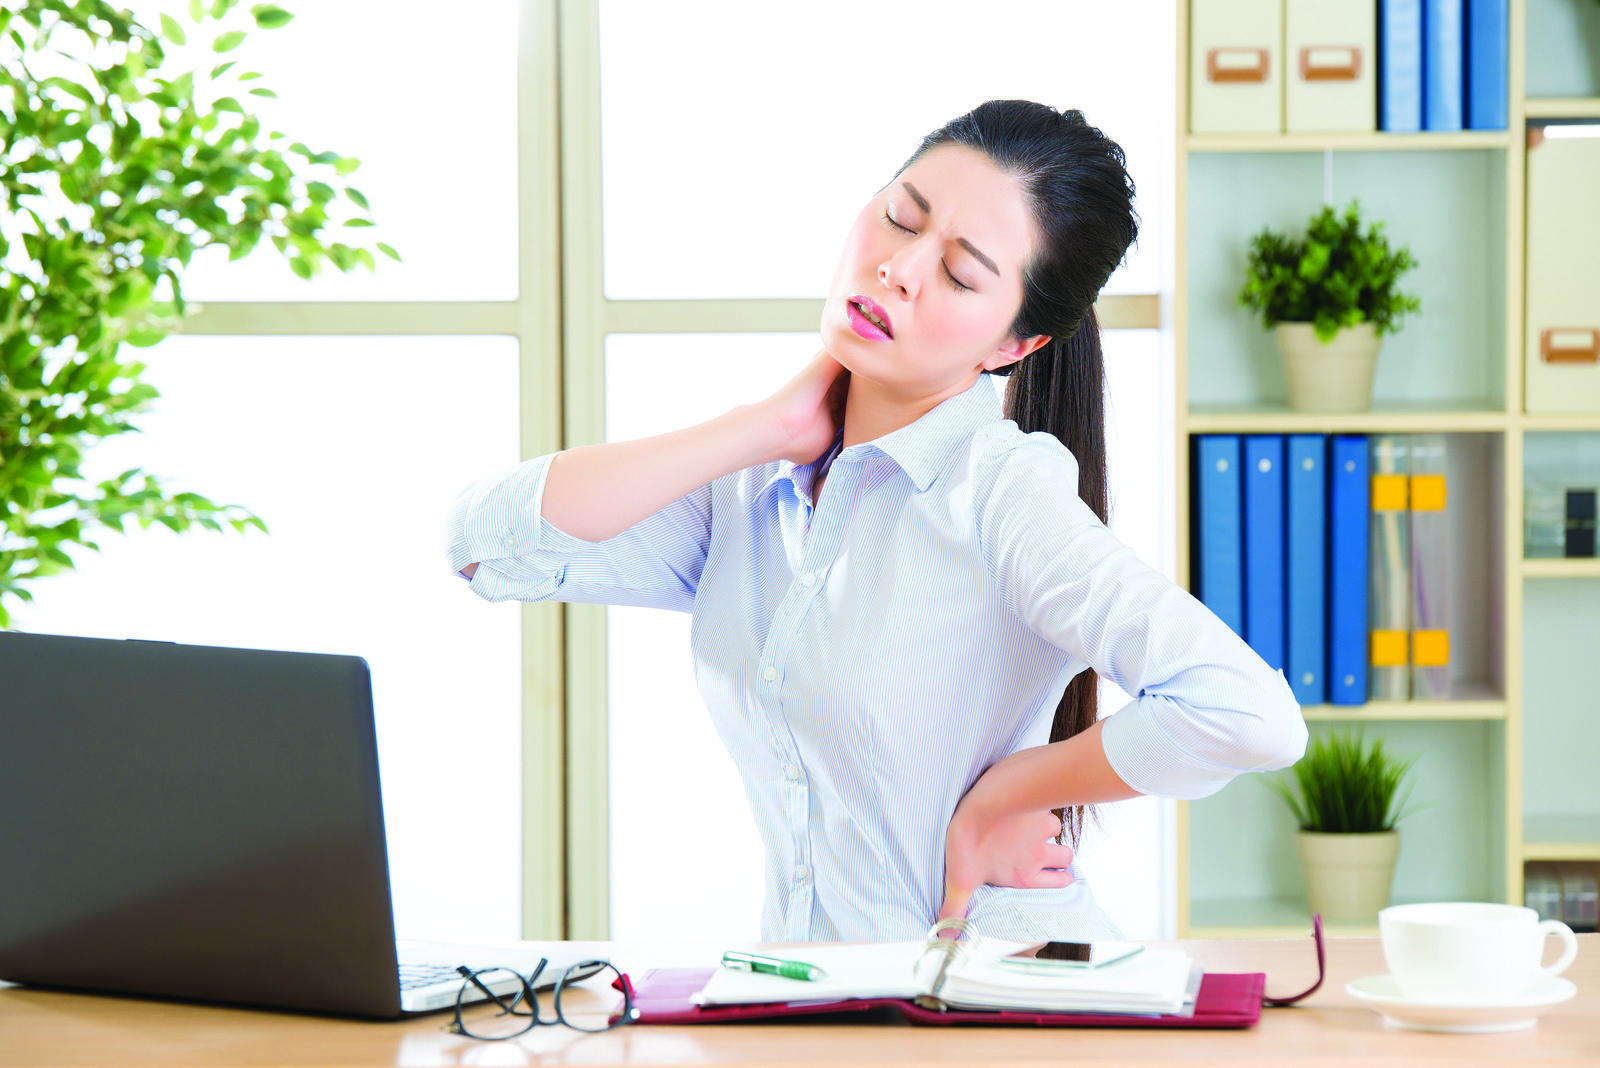 3 ways to avoid neck tension at work